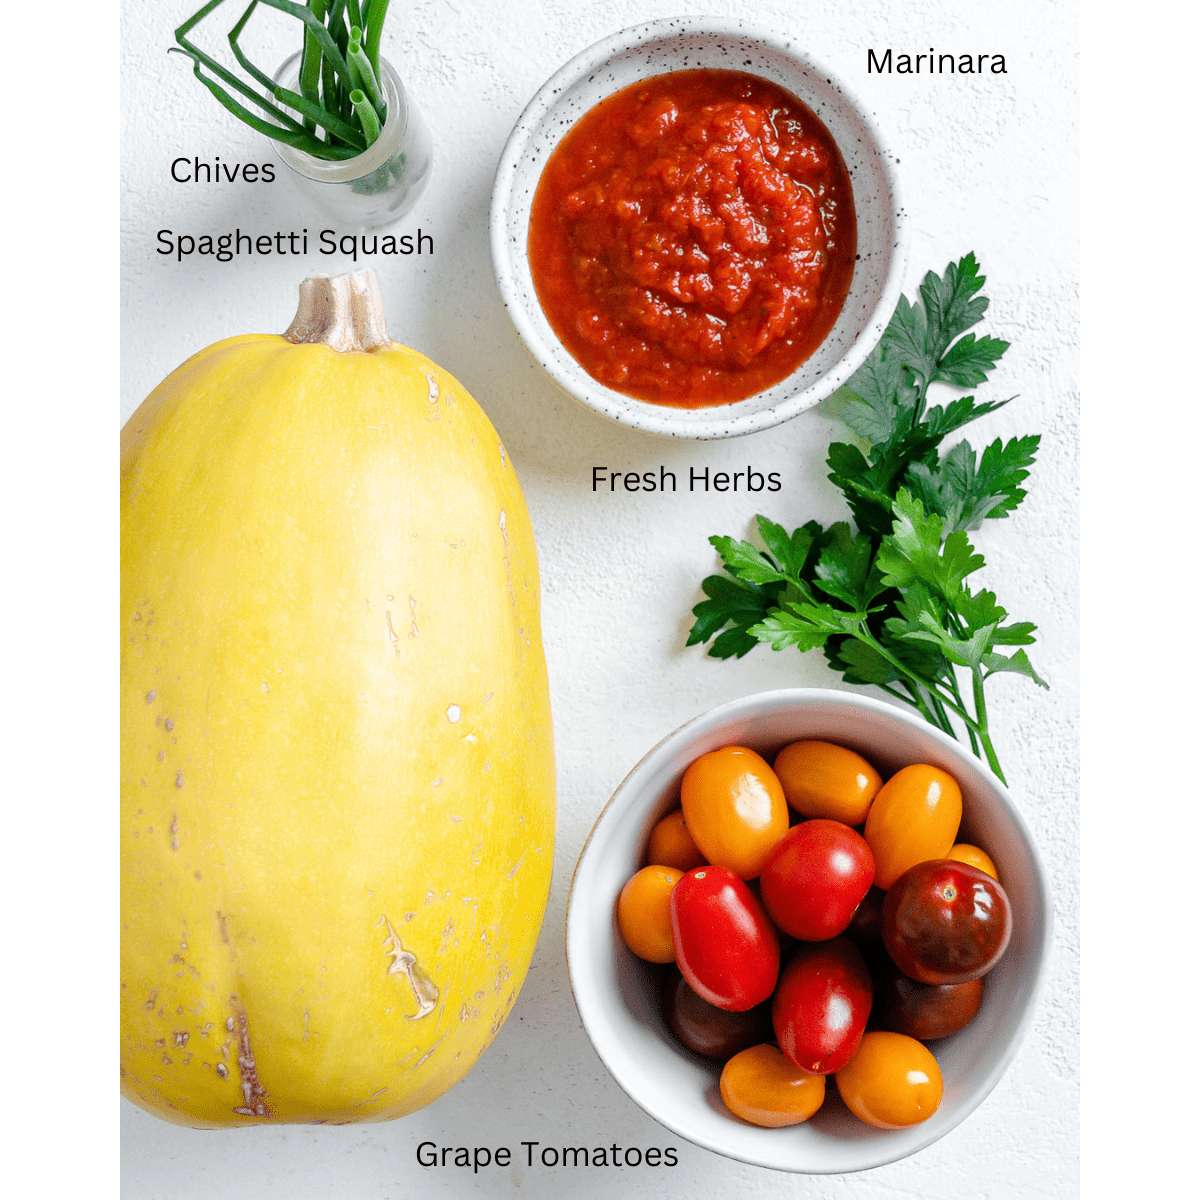 ingredients for roasted spaghetti squash measured out a،nst a white surface